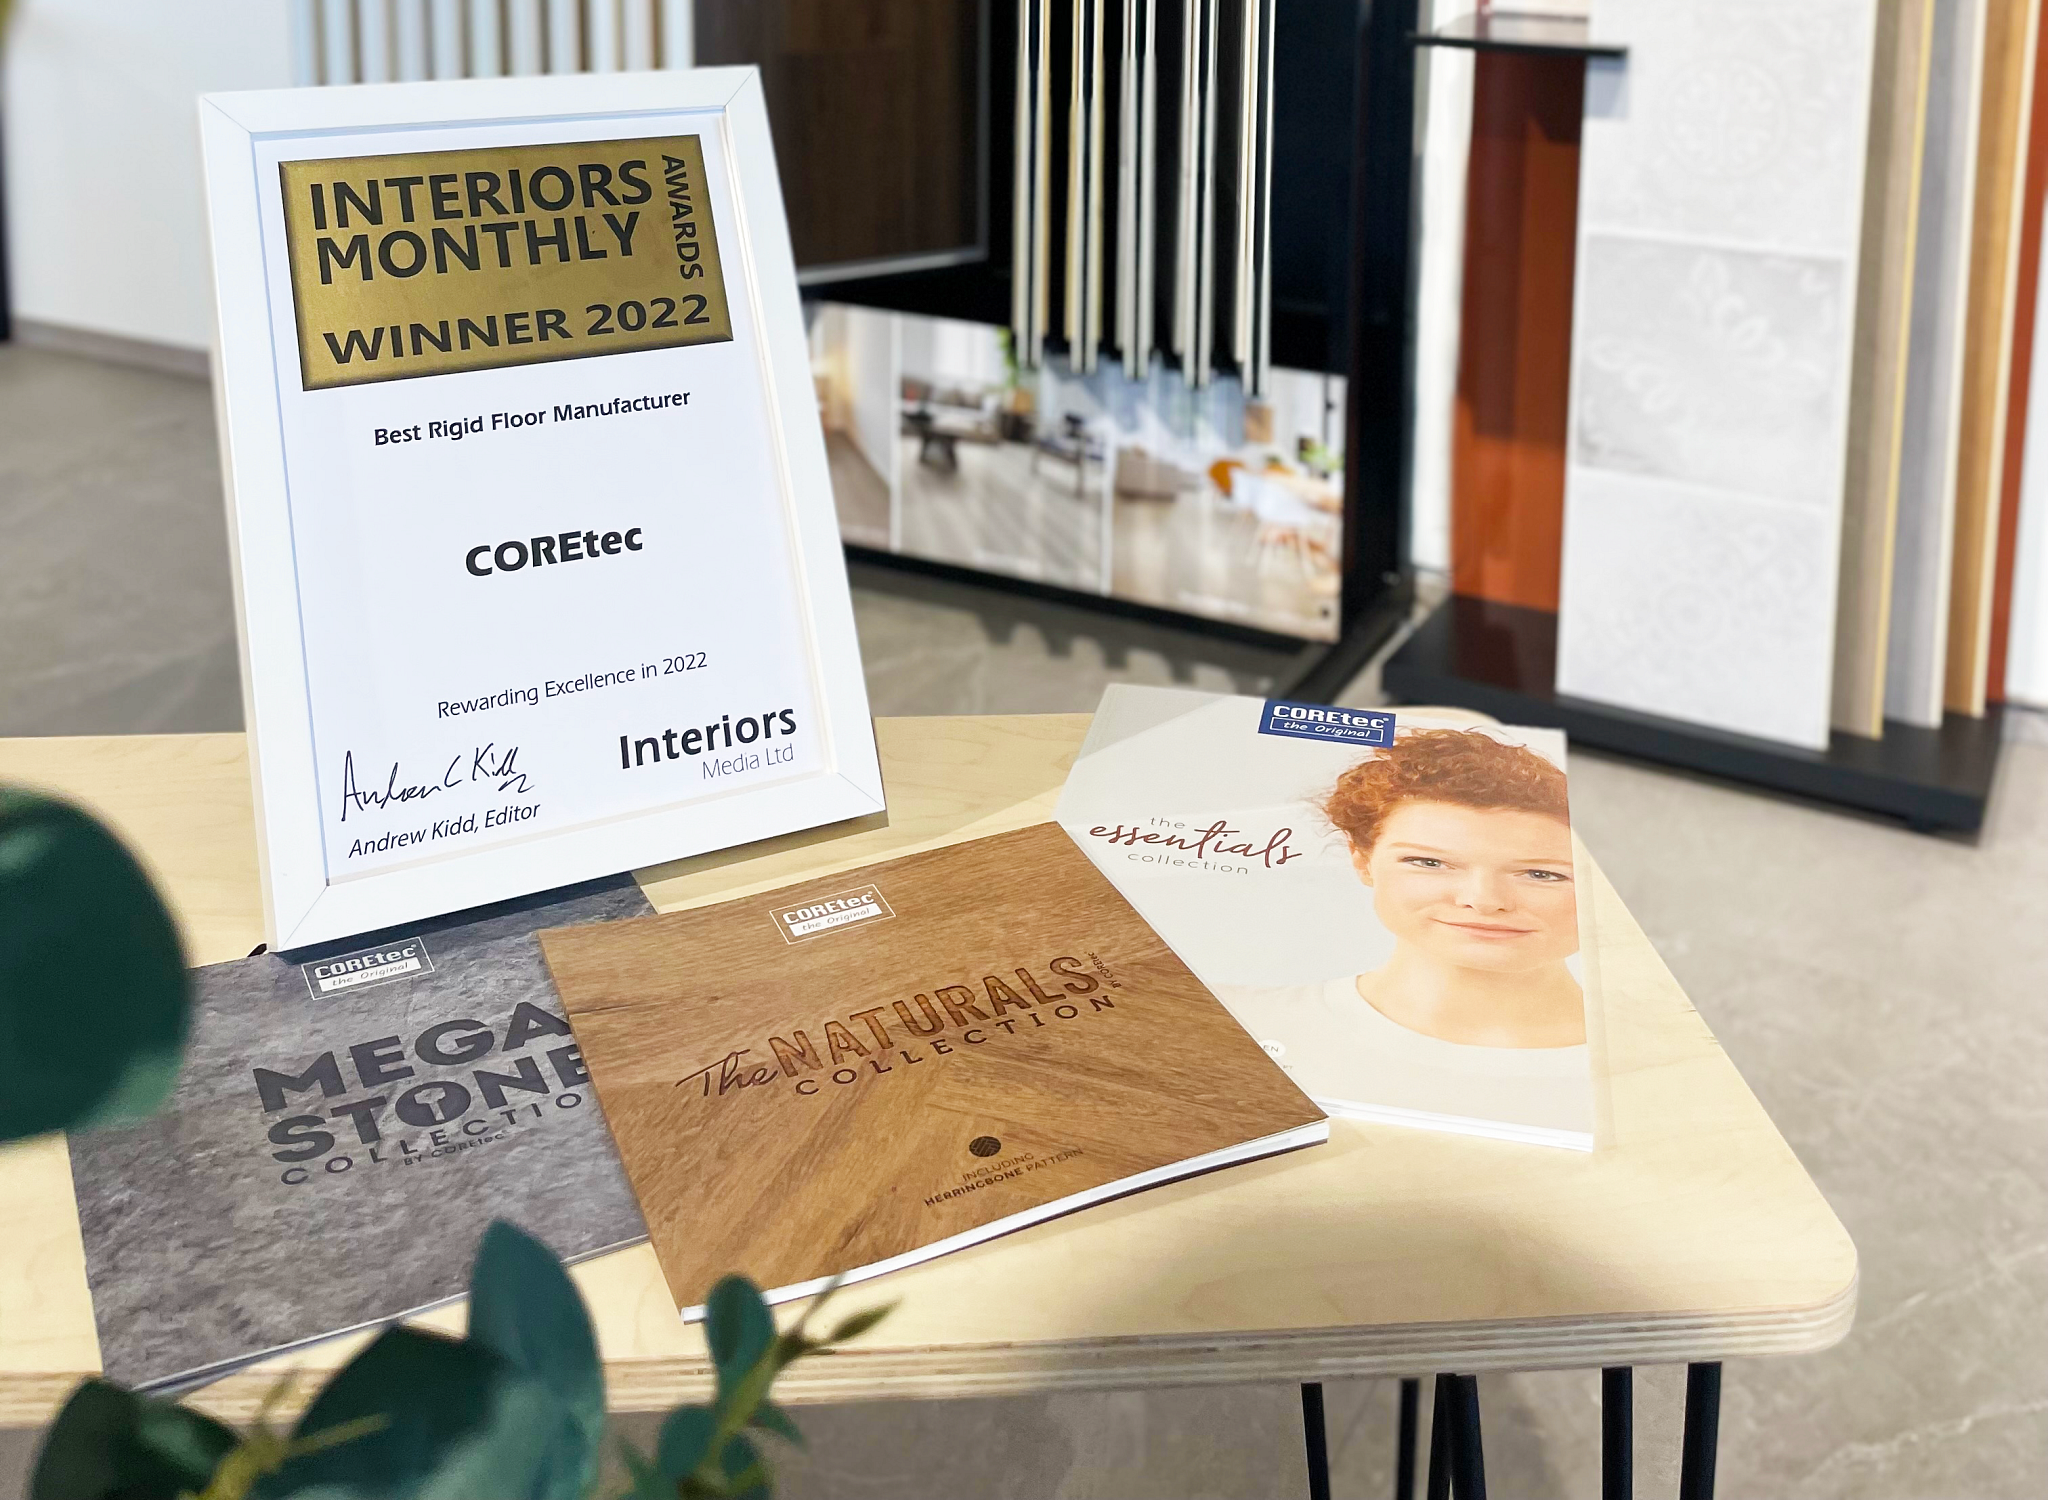 We are very proud to announce that we have won the Interiors Monthly Award in the category 